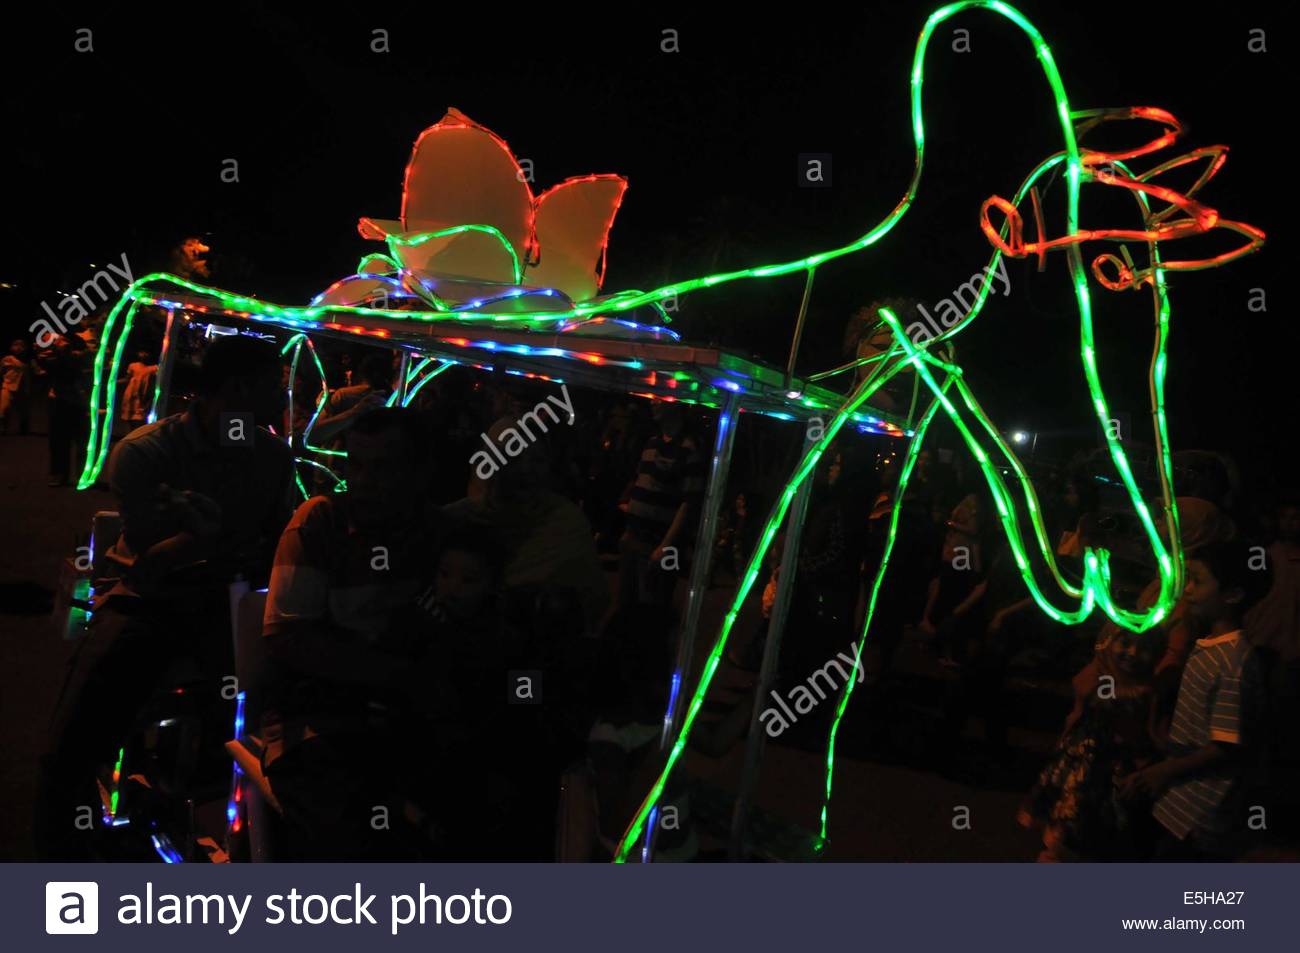 Hometowns Stock Photos & Hometowns Stock Images - Alamy